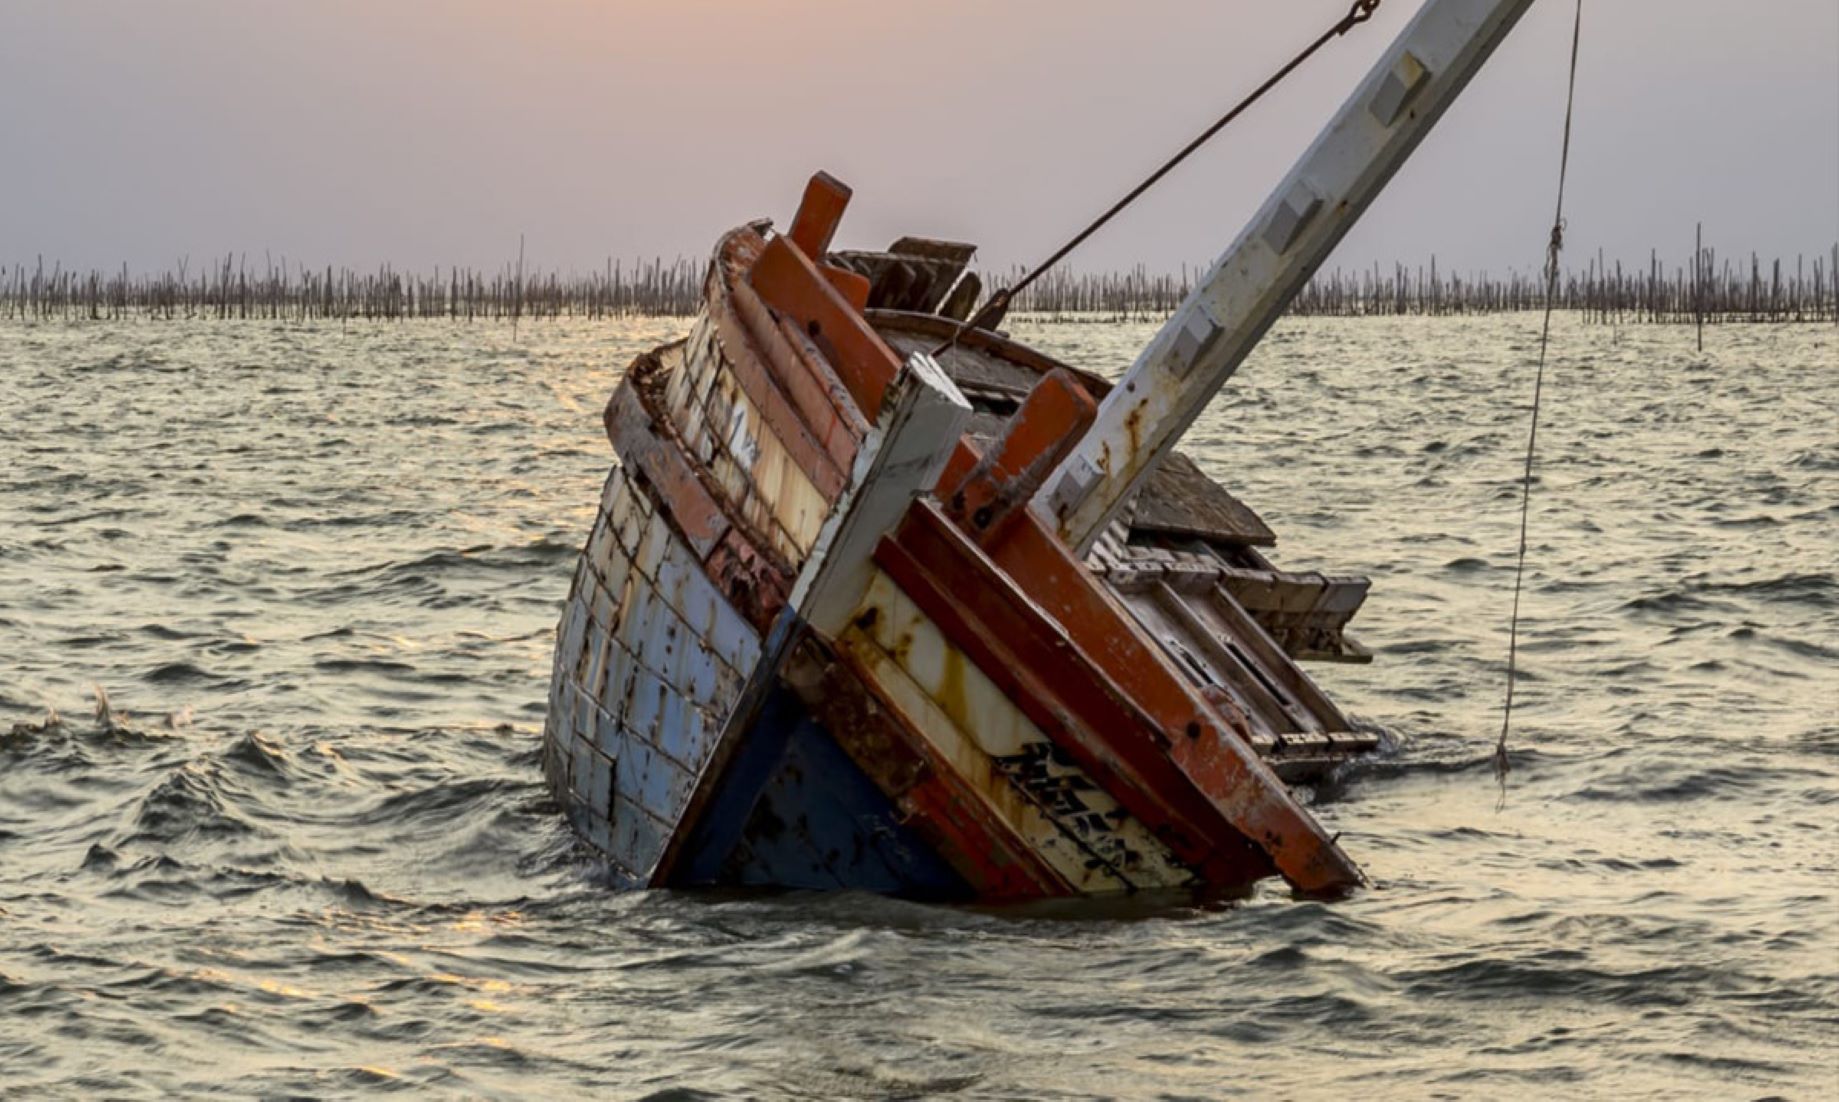 Boat Sank Off Cambodia’s Sea, Over 20 Chinese Missing